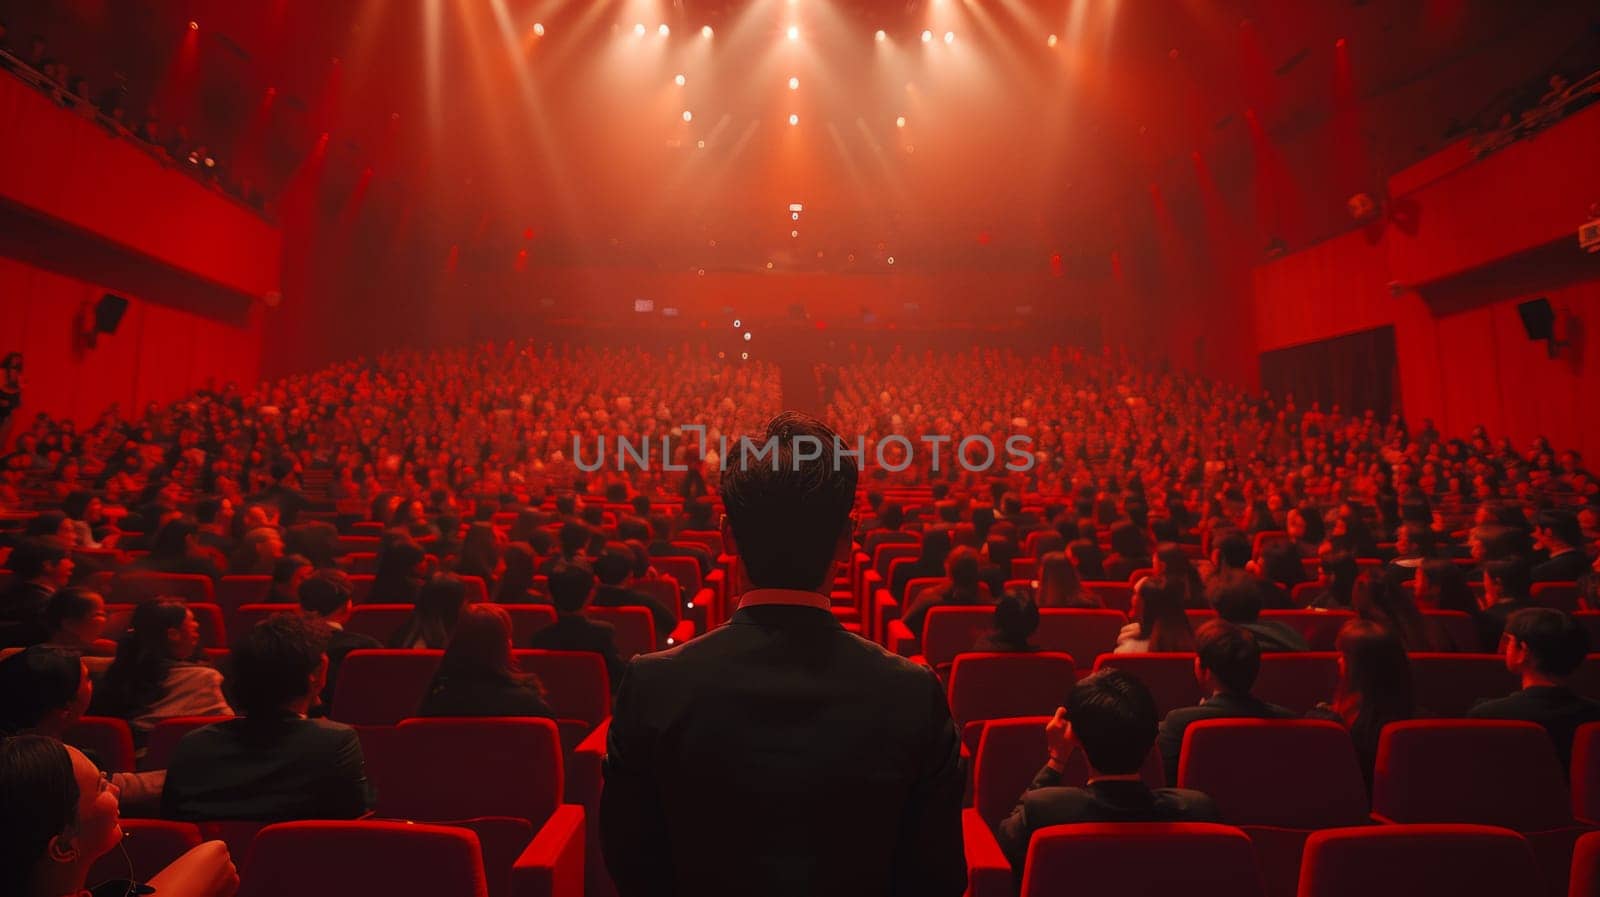 A confident man addresses a crowded auditorium, capturing their attention with his powerful words as he stands poised and engaging.